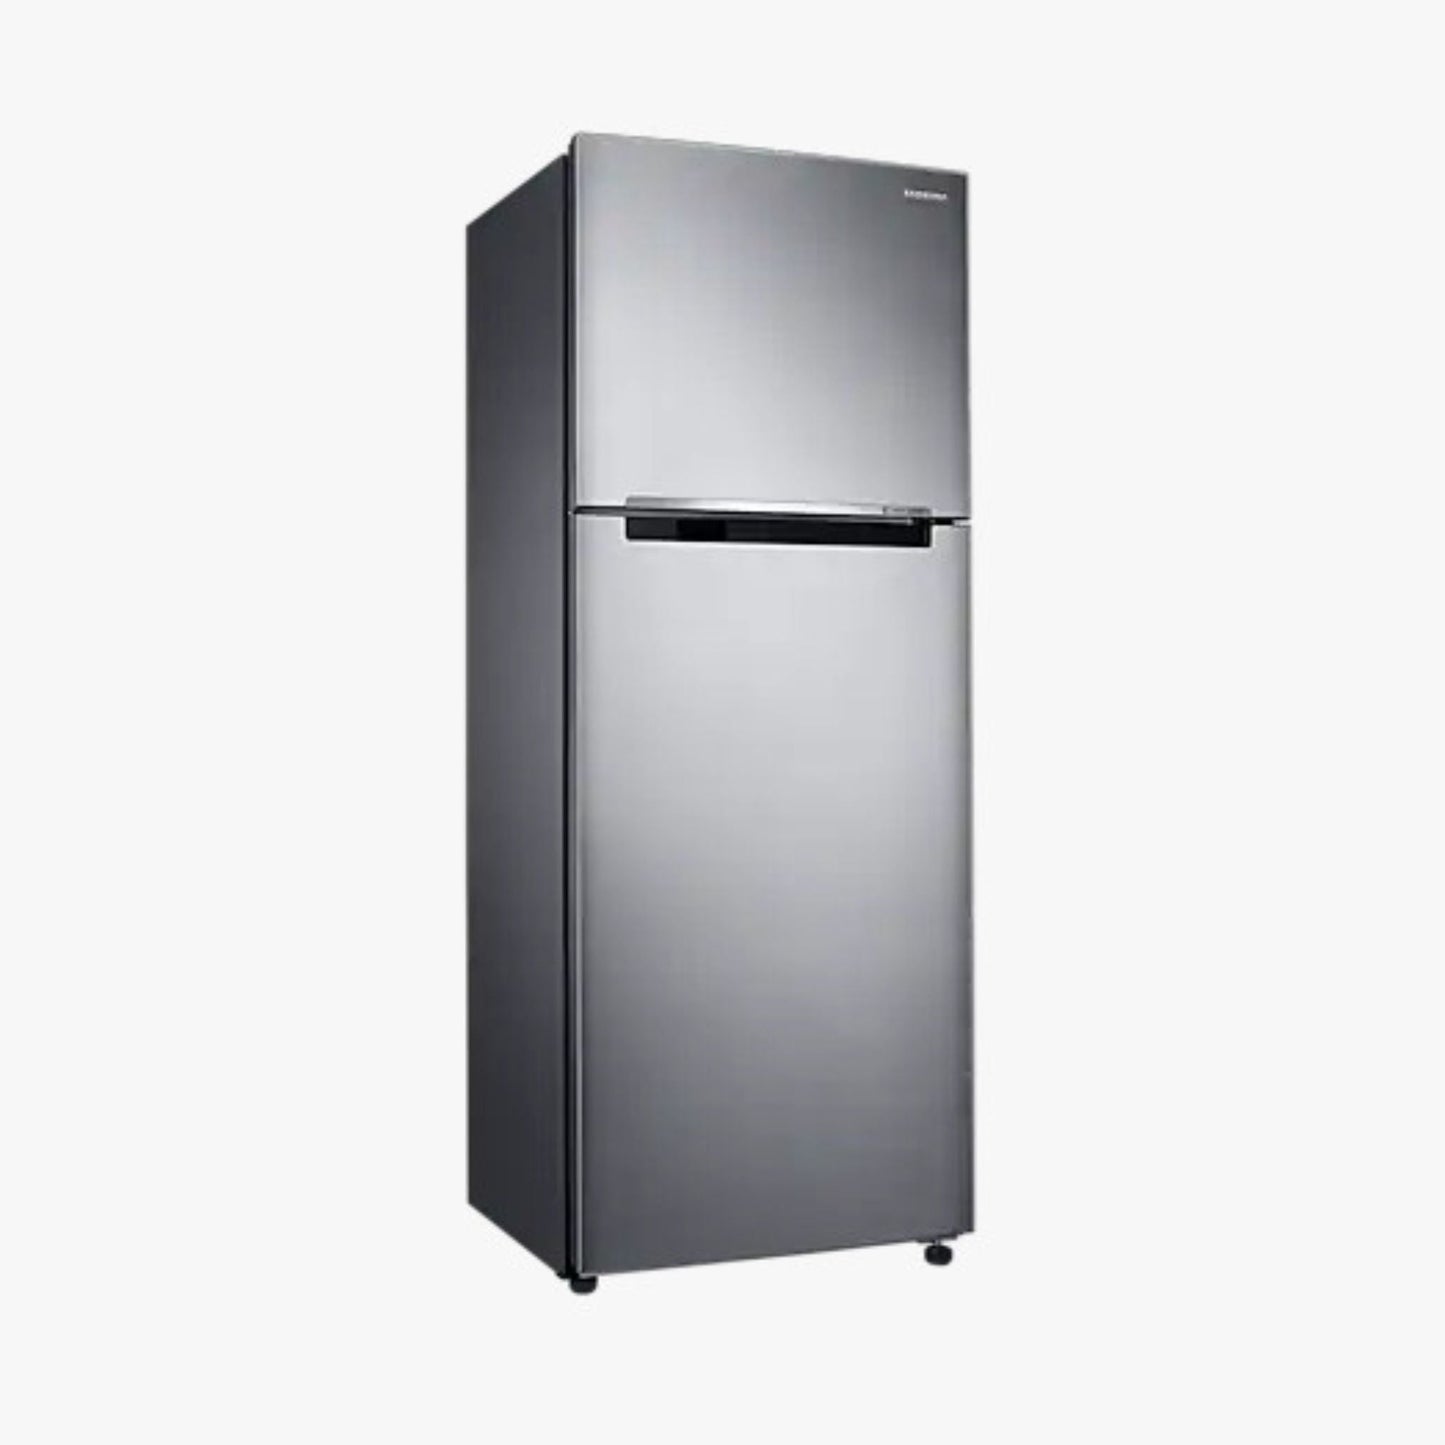 Samsung 384L Refrigerator with Twin Cooling System, RT42K5030S8